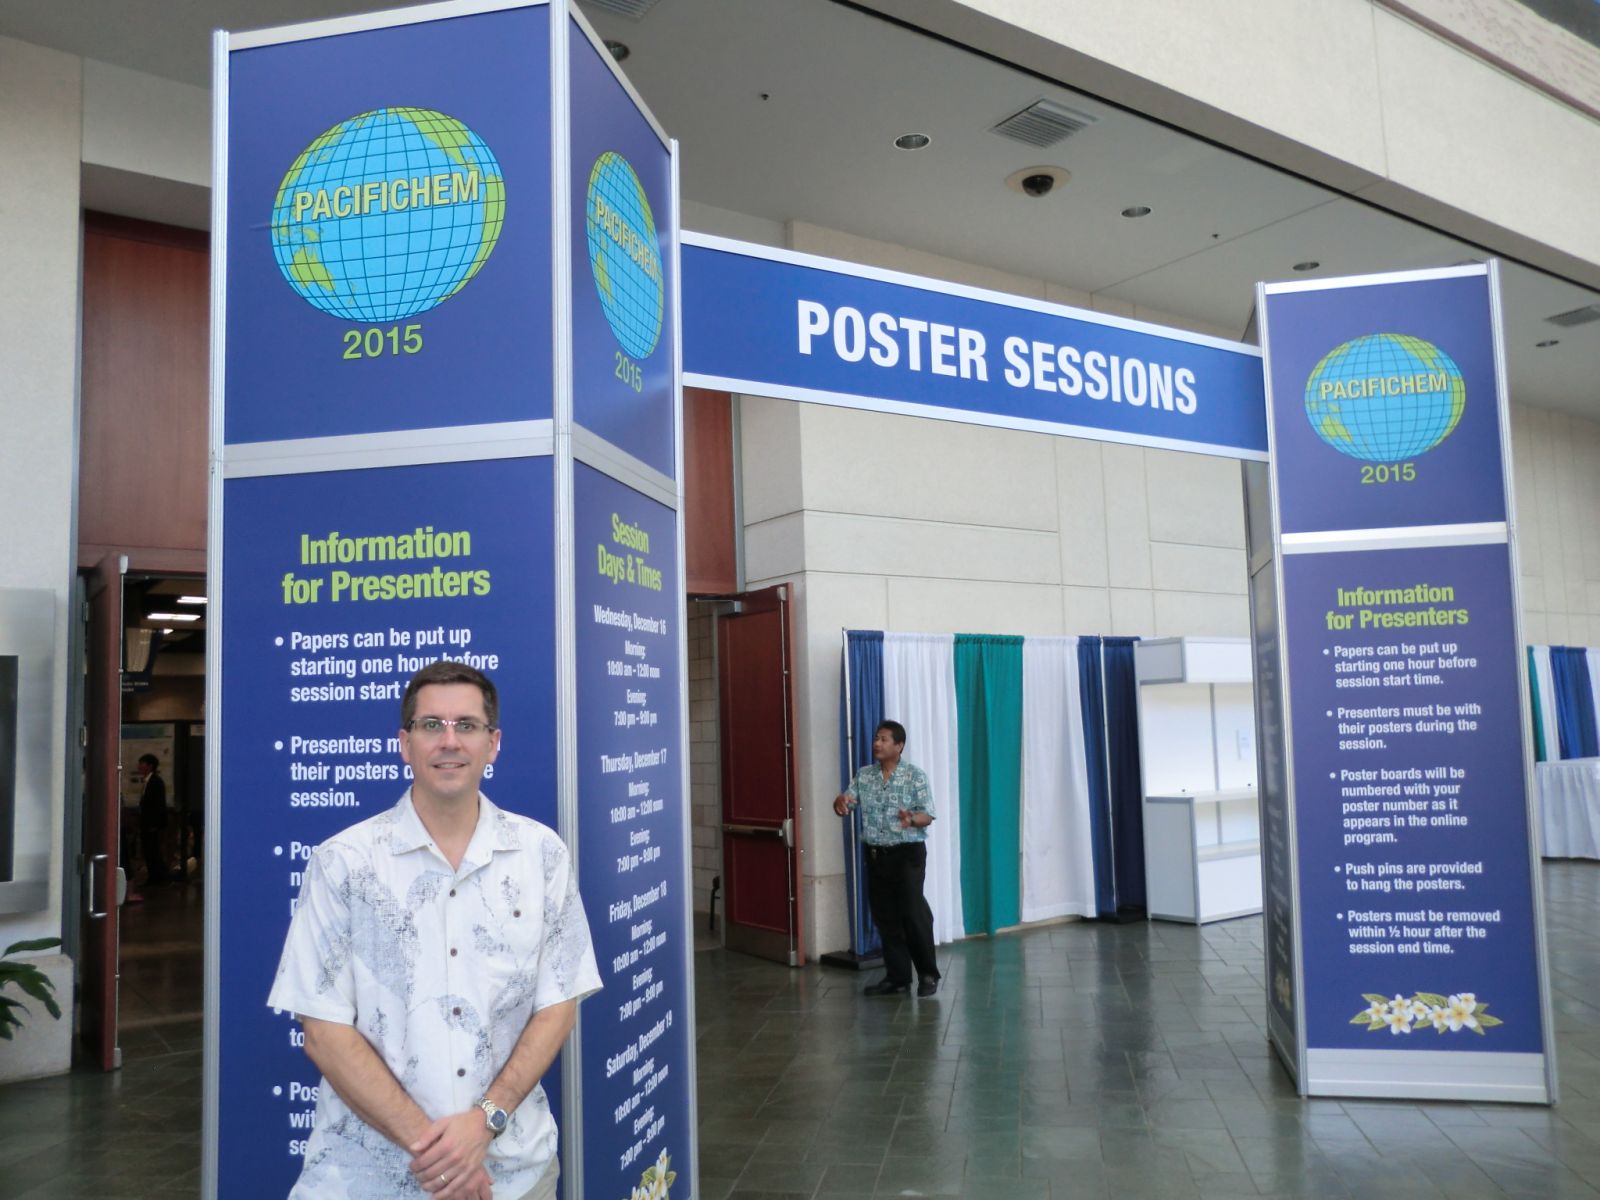 Professor Rehse outside the poster exhibition hall